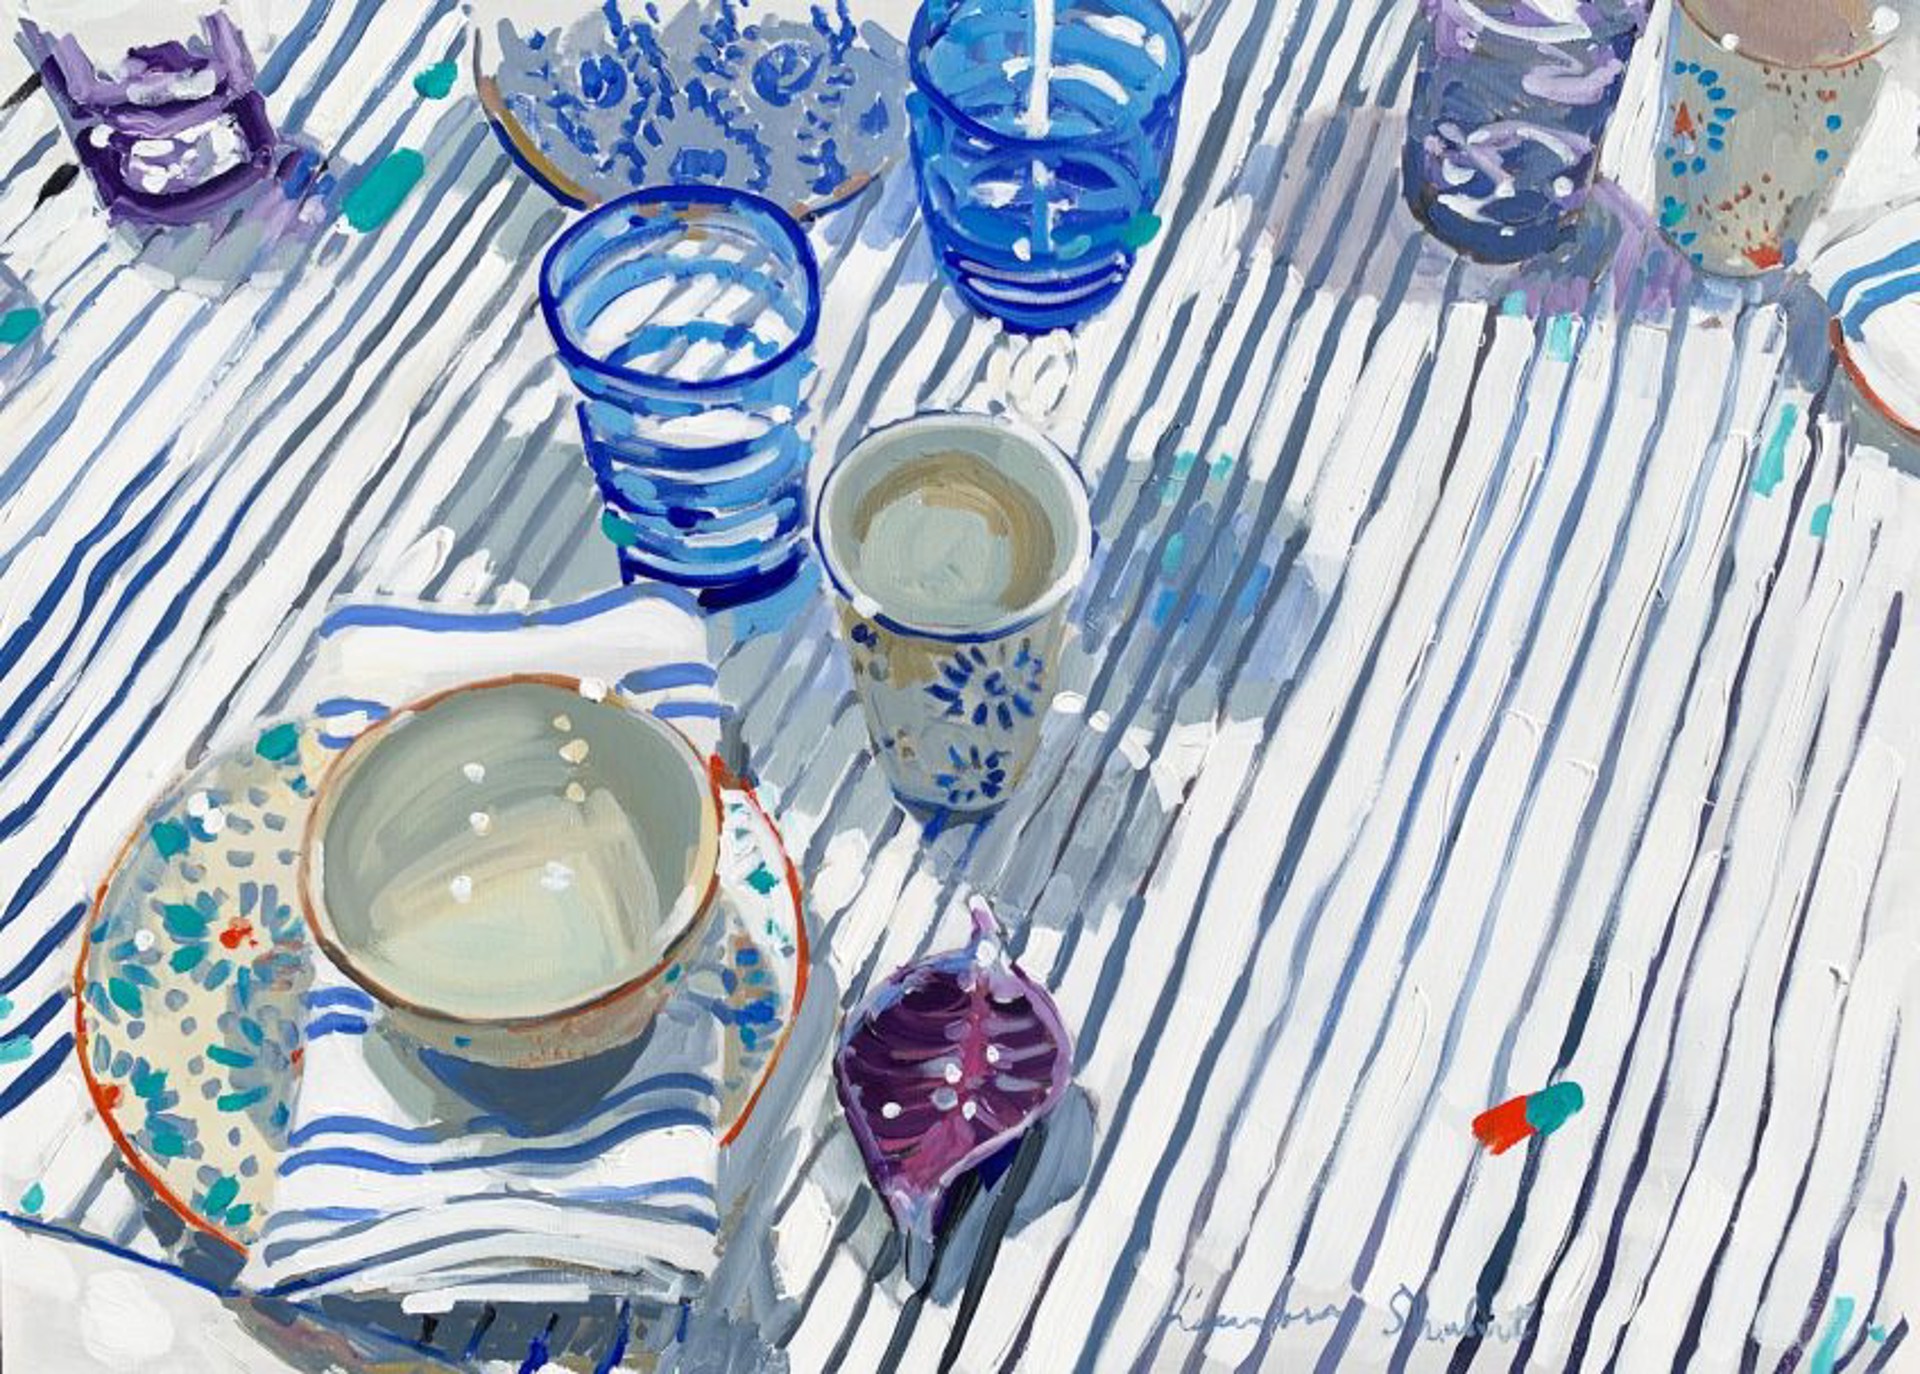 Blue Striped Tablecloth by Laura Lacambra Shubert